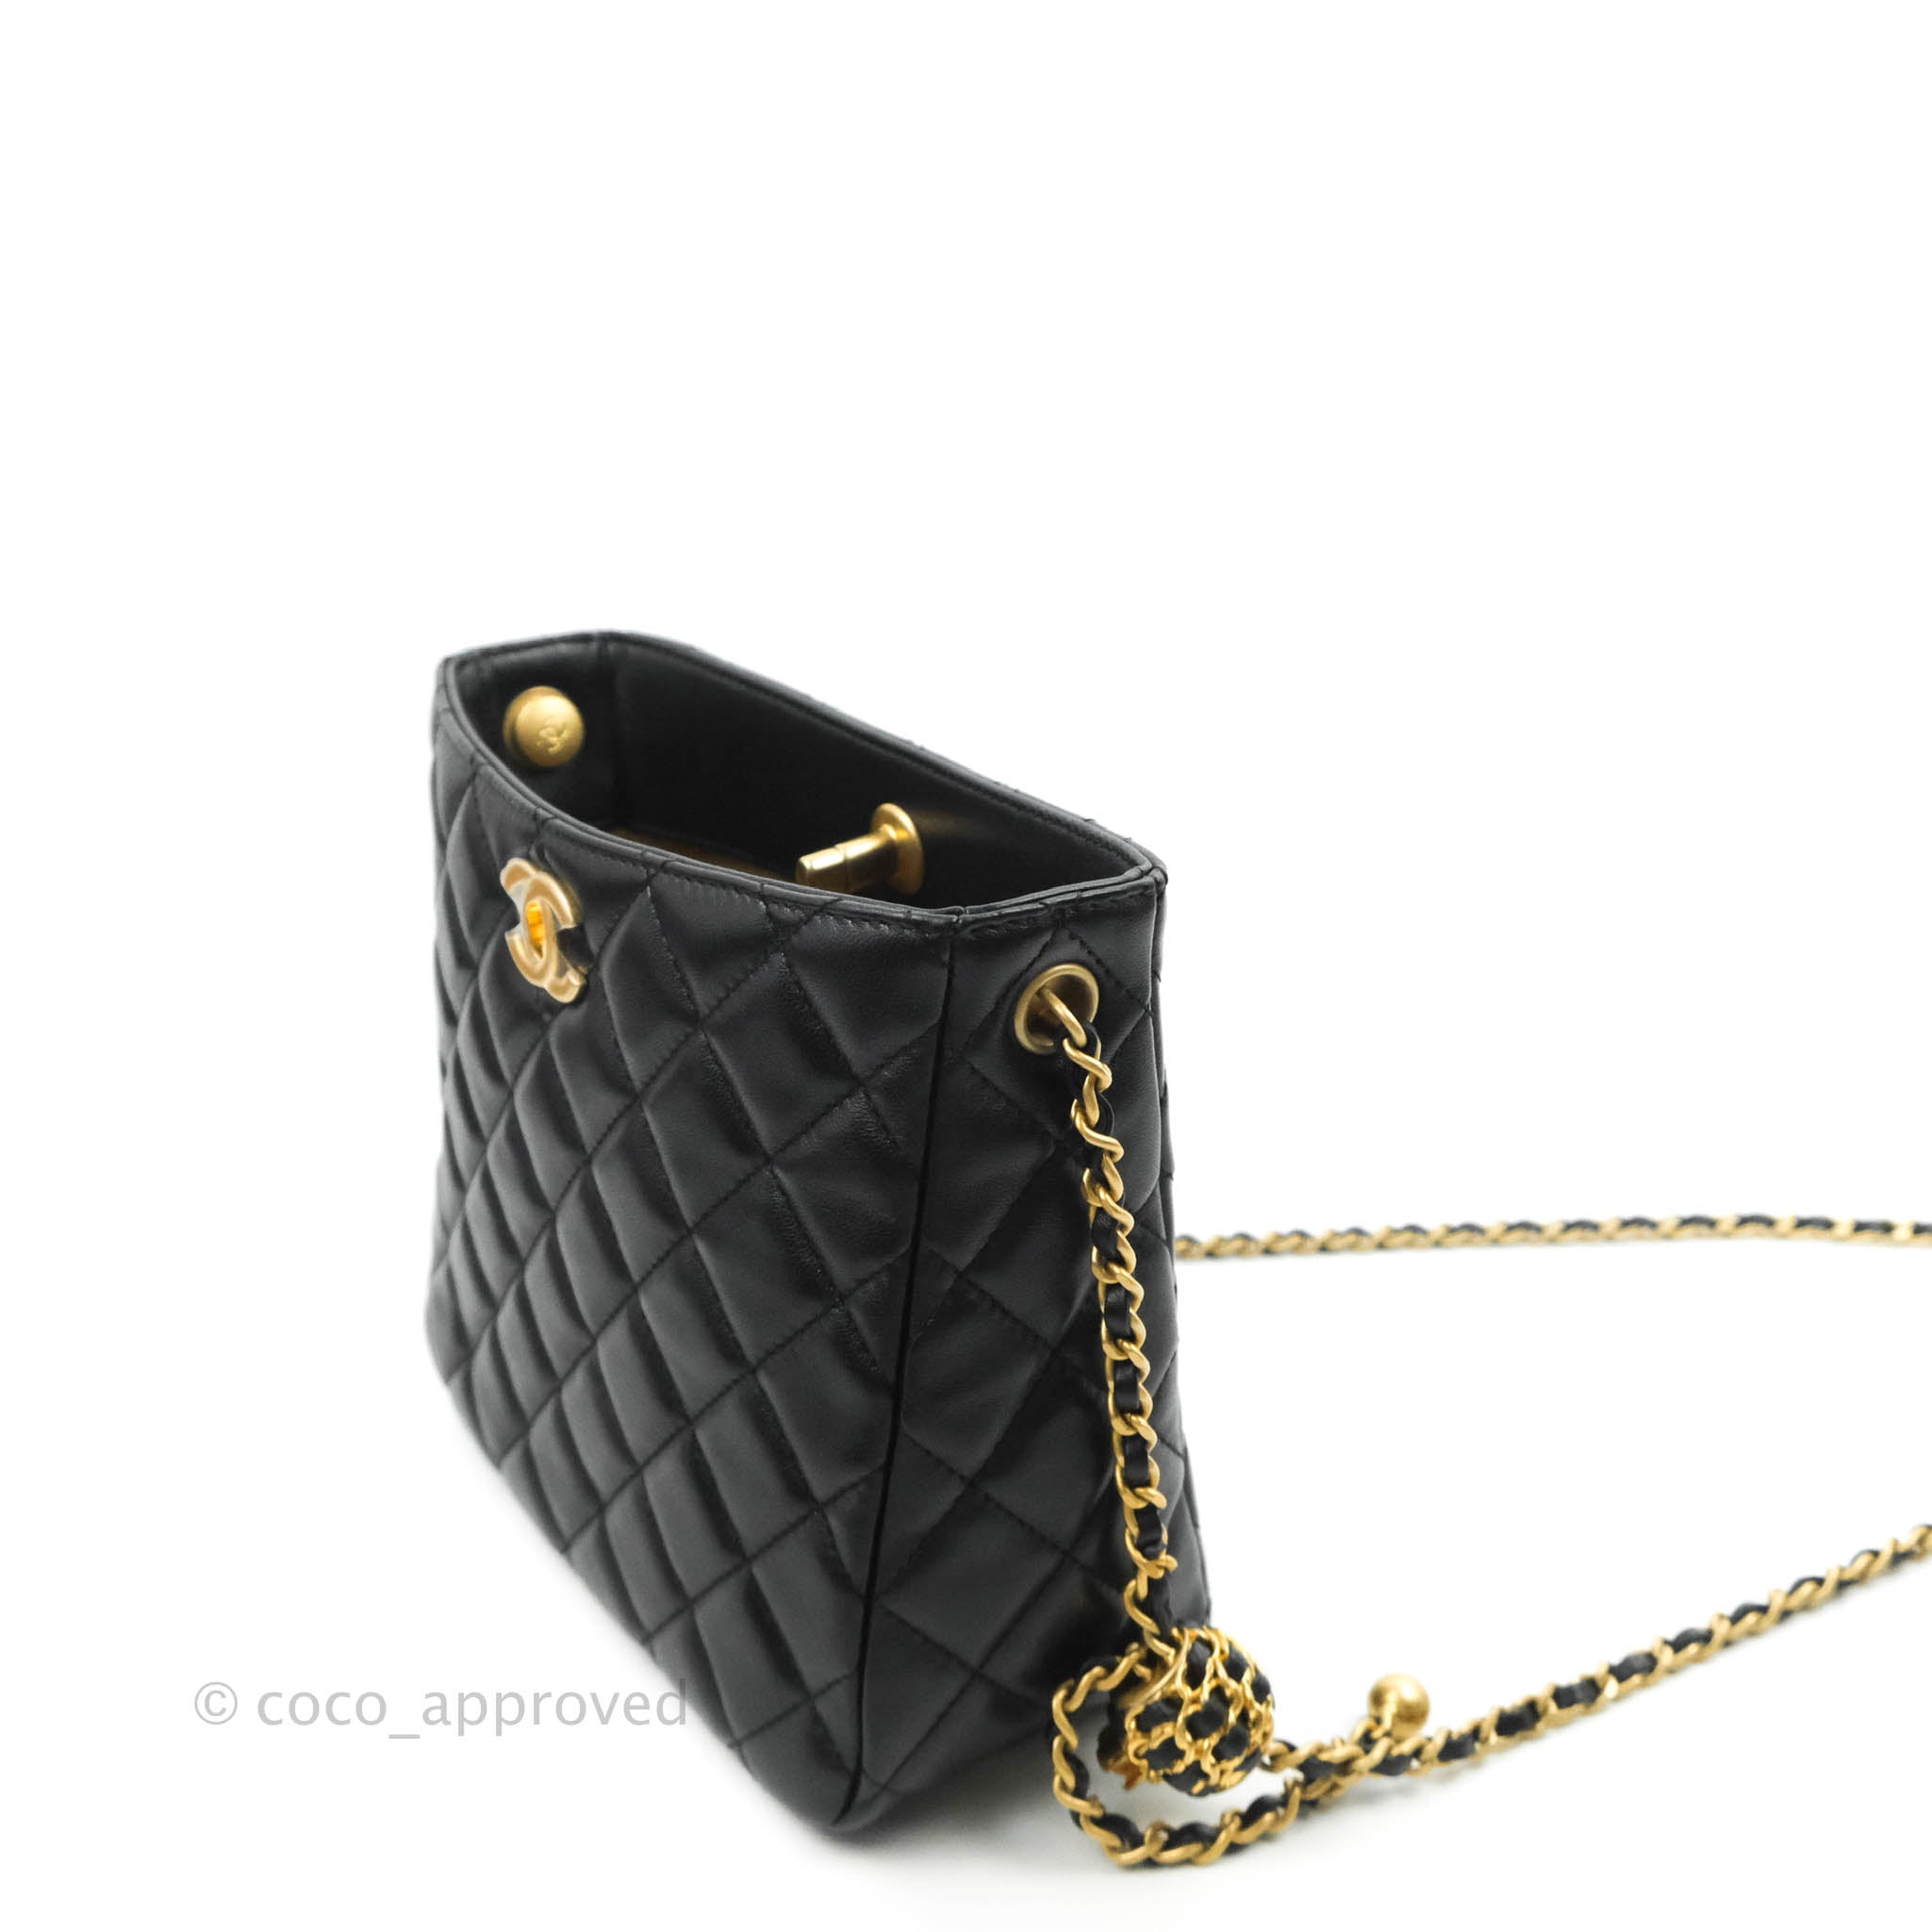 Chanel Small Hobo Bag (With Pearl Chain)